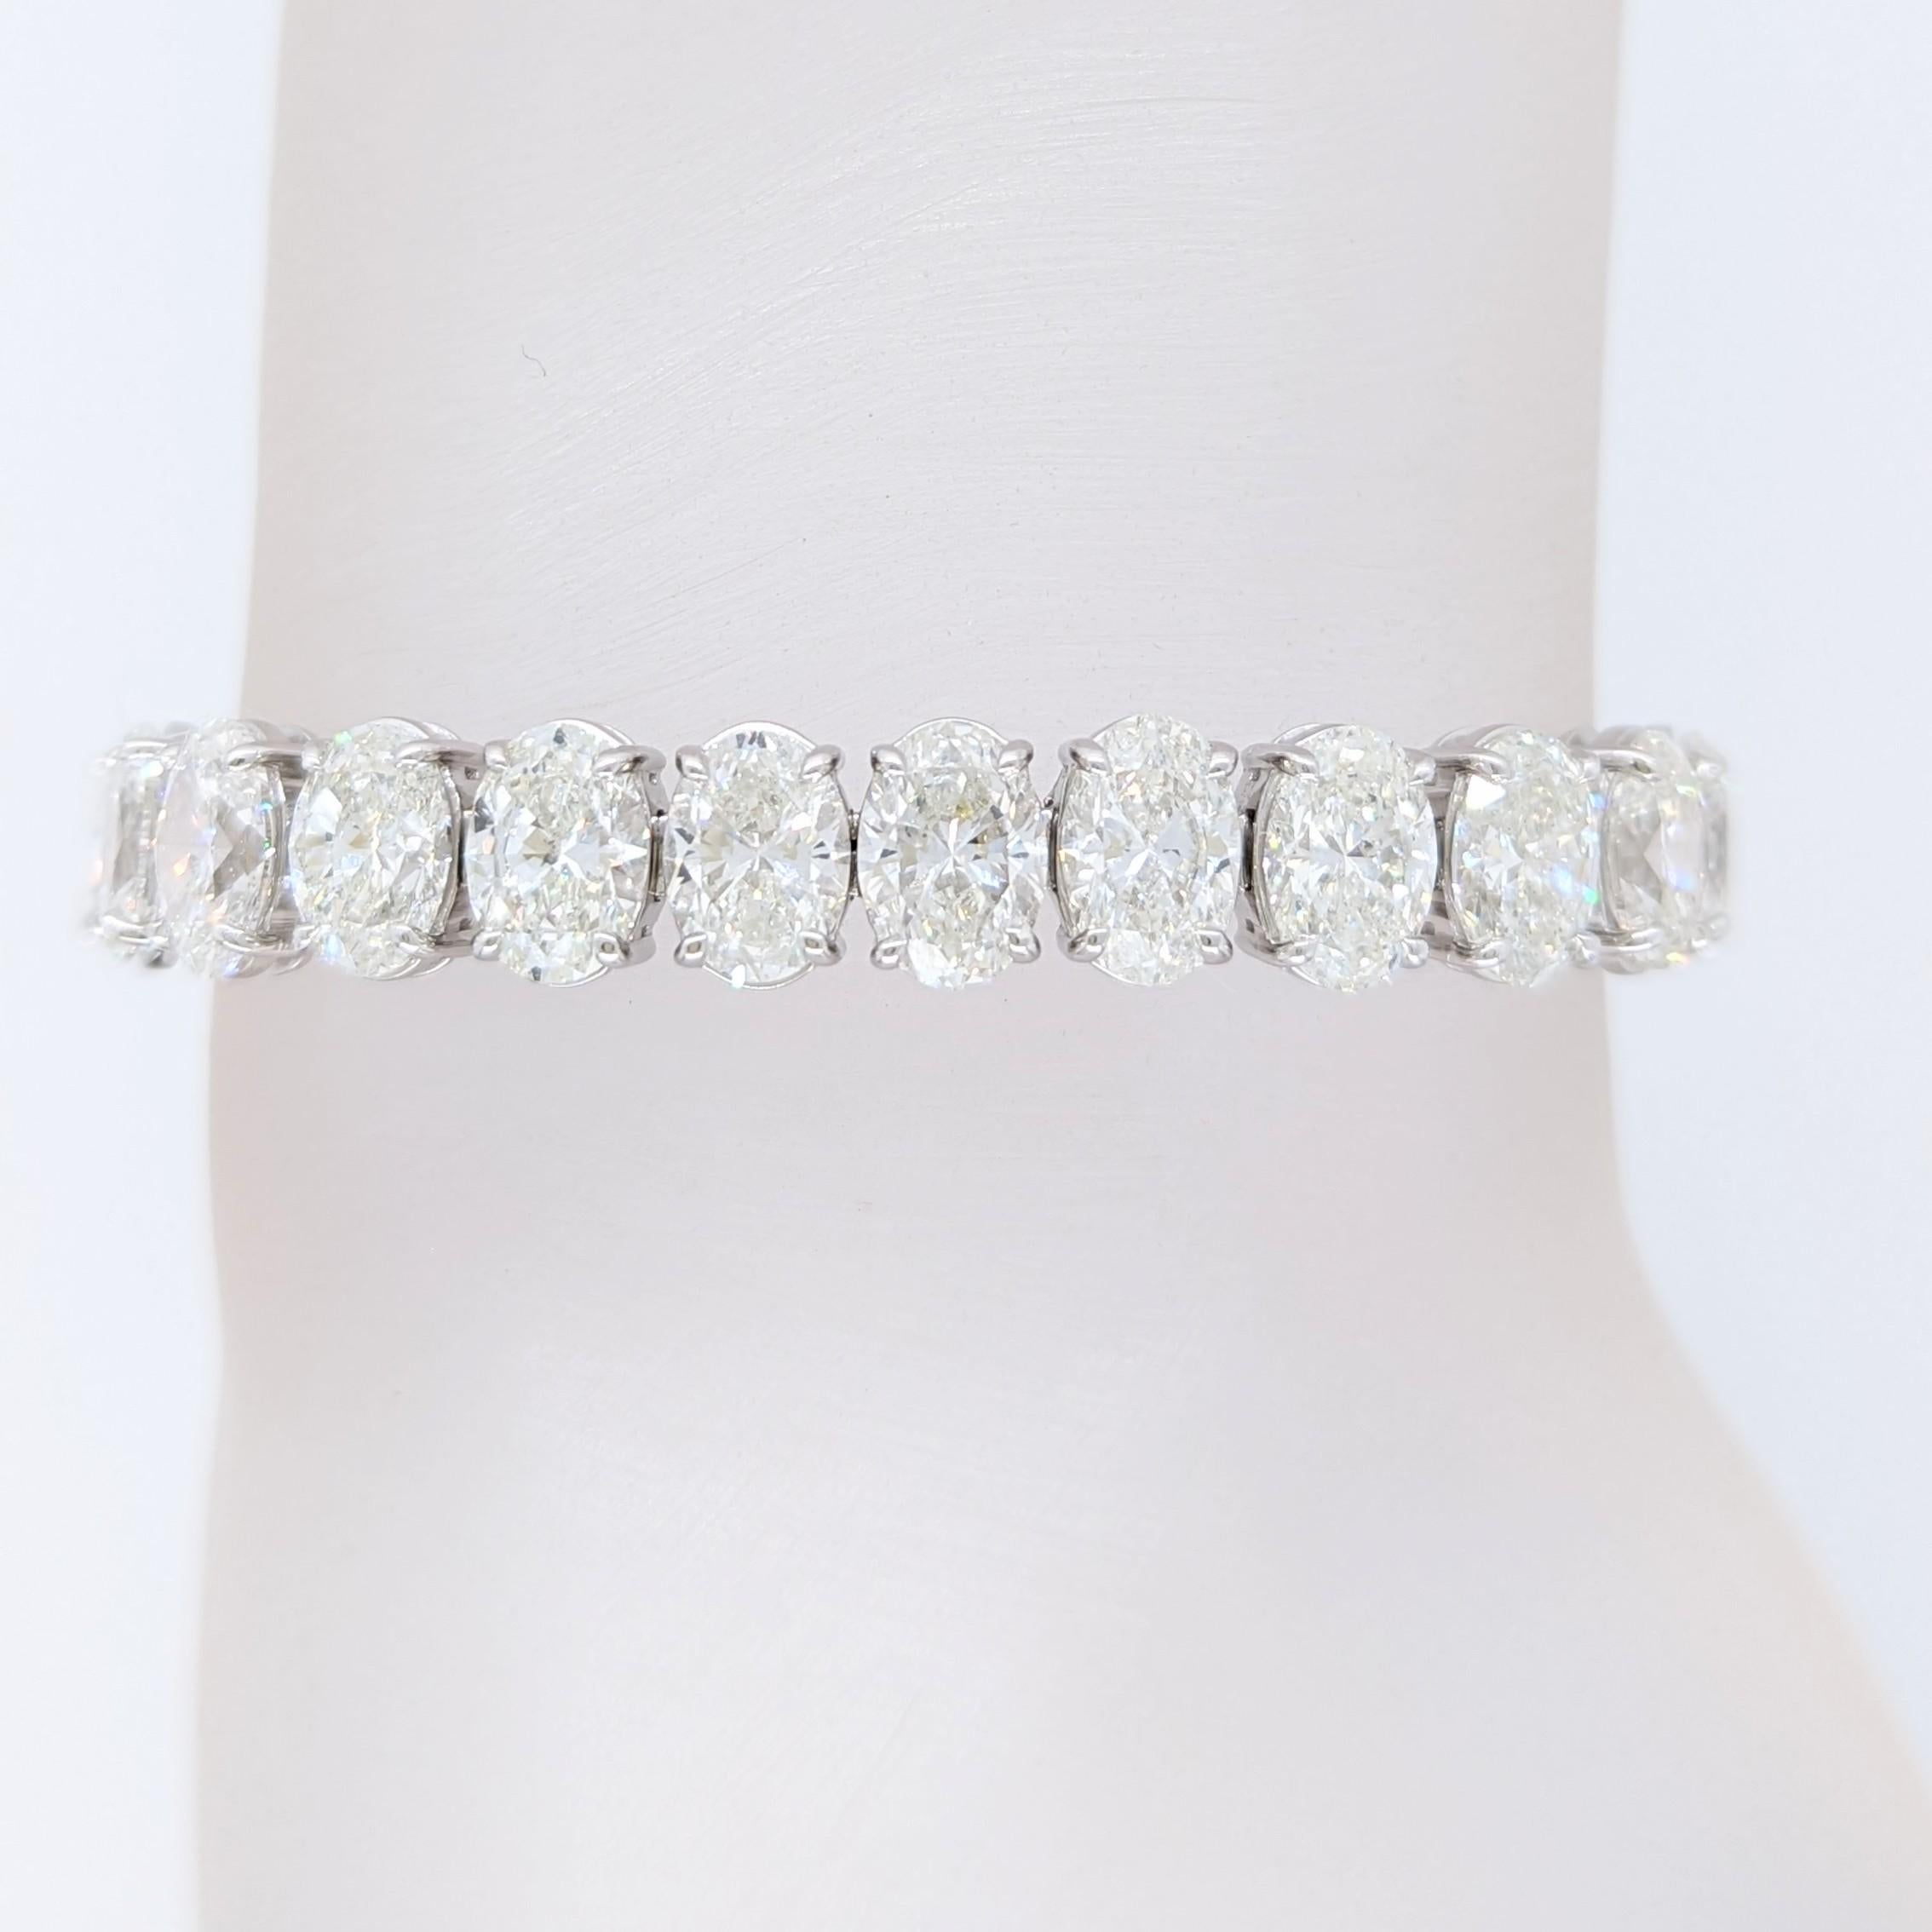 Absolutely stunning 31.18 ct. EFG SI1-SI2 white diamond ovals bracelet.  Each stone is about 1 carat with a total of 31 stones.  Handmade in platinum.  Length is 7